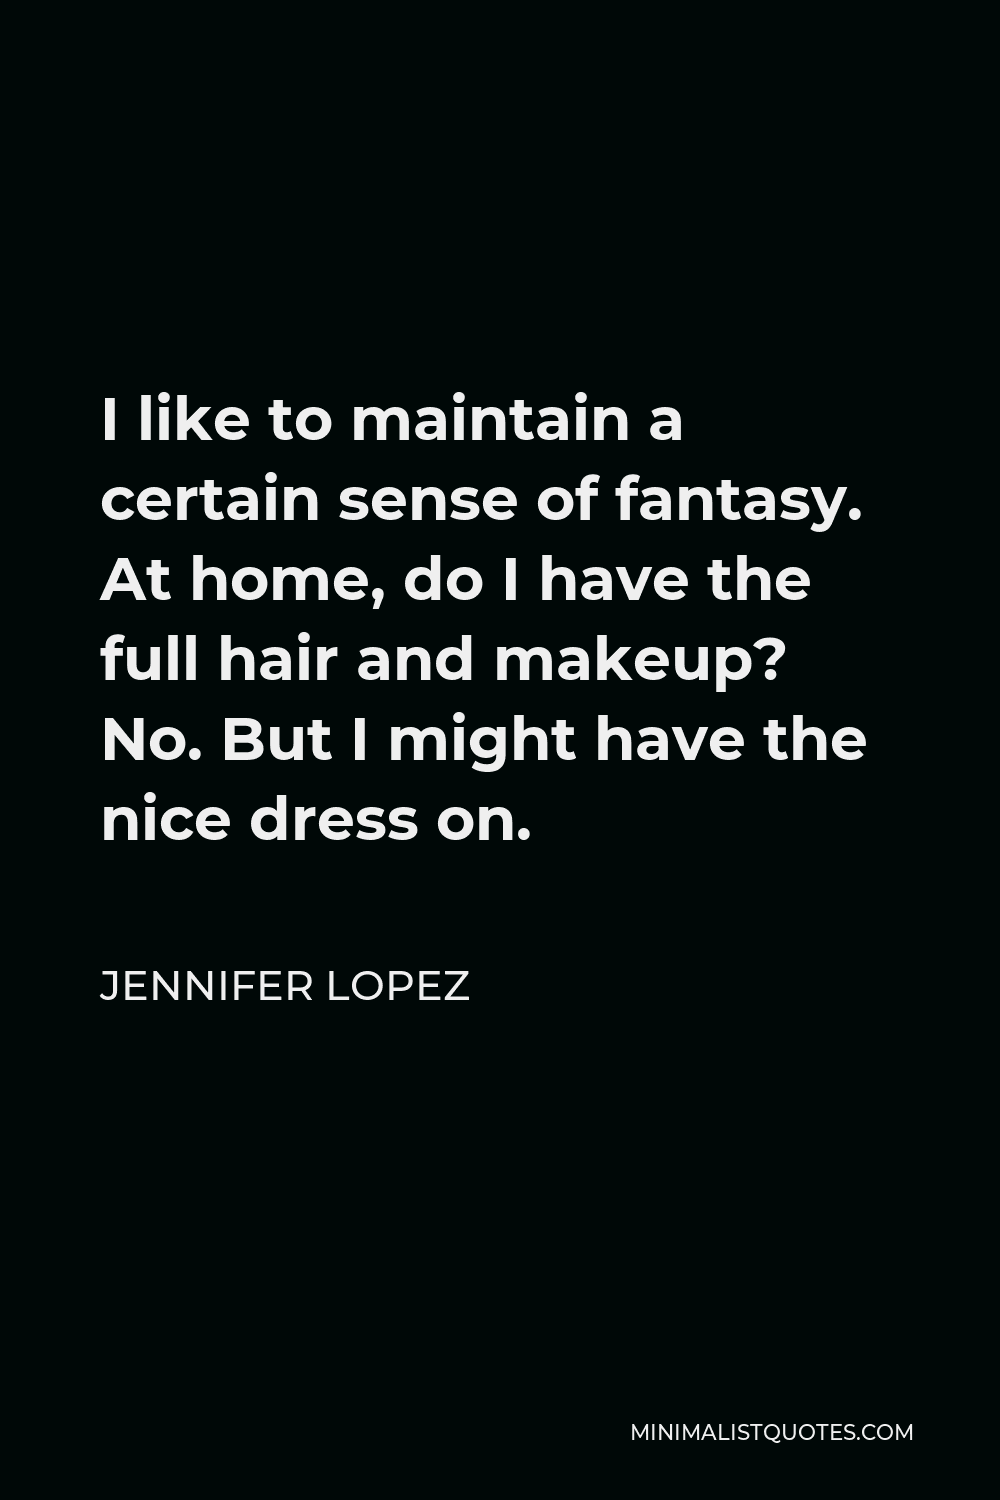 Jennifer Lopez Quote - I like to maintain a certain sense of fantasy. At home, do I have the full hair and makeup? No. But I might have the nice dress on.